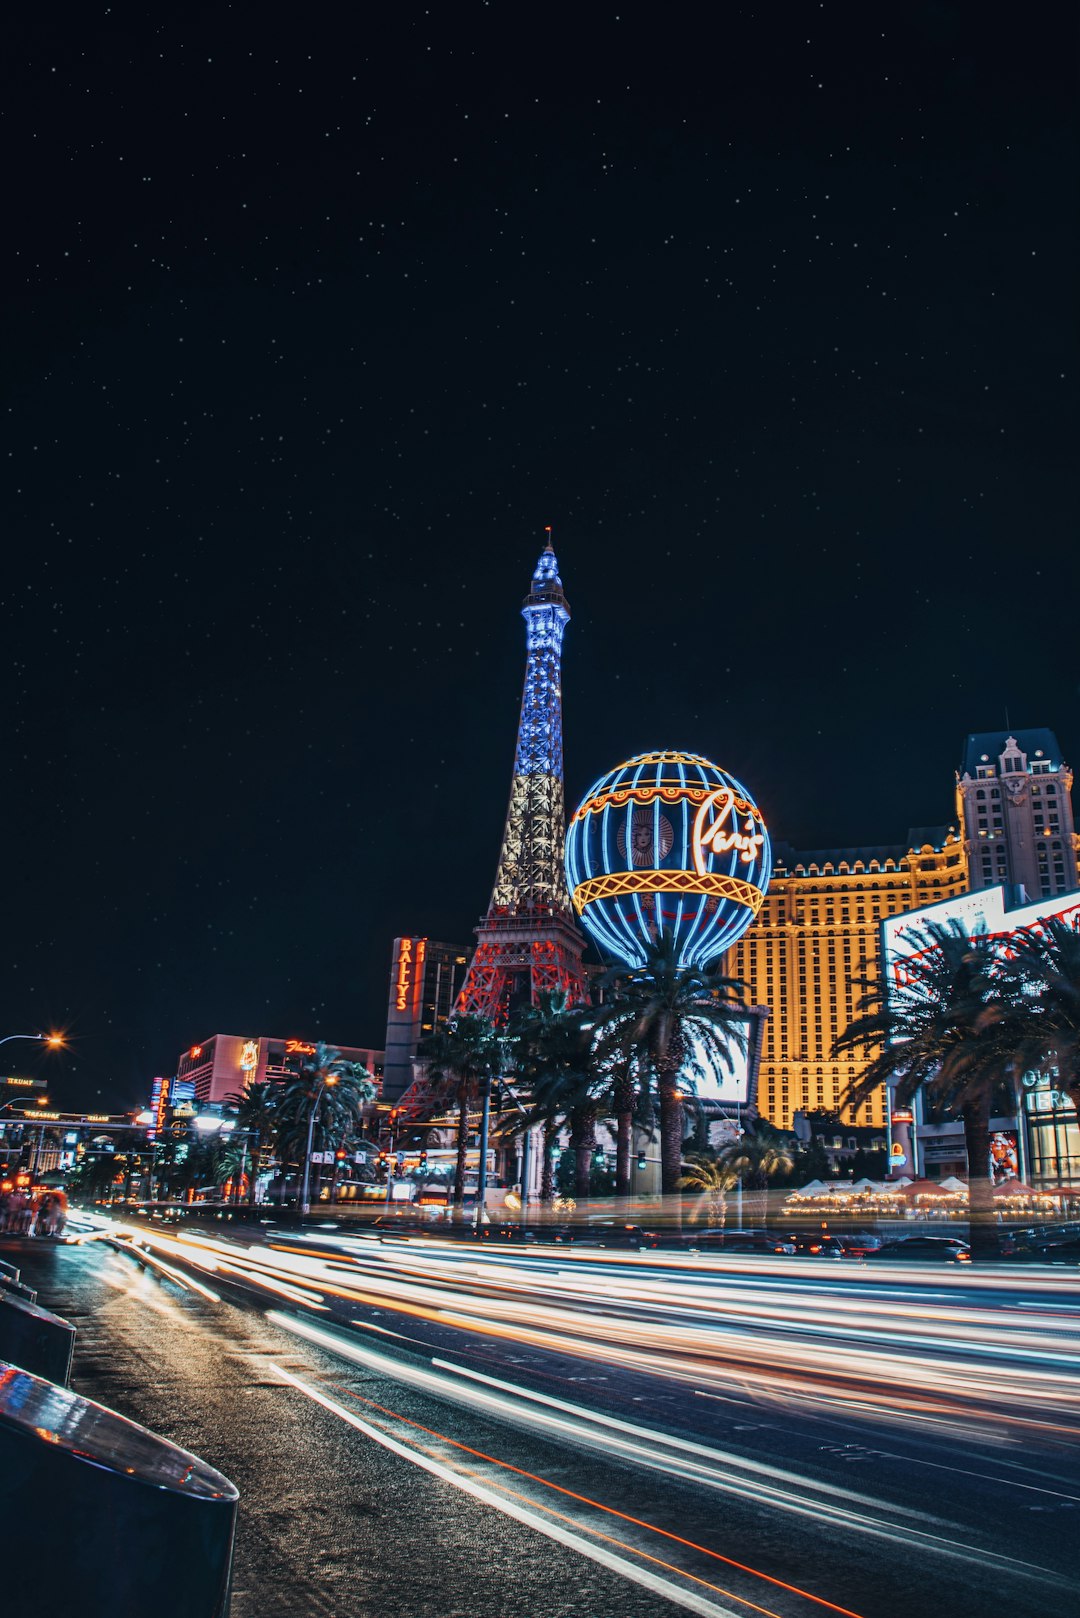 The Las Vegas Strip: Playground for the Rich and Famous